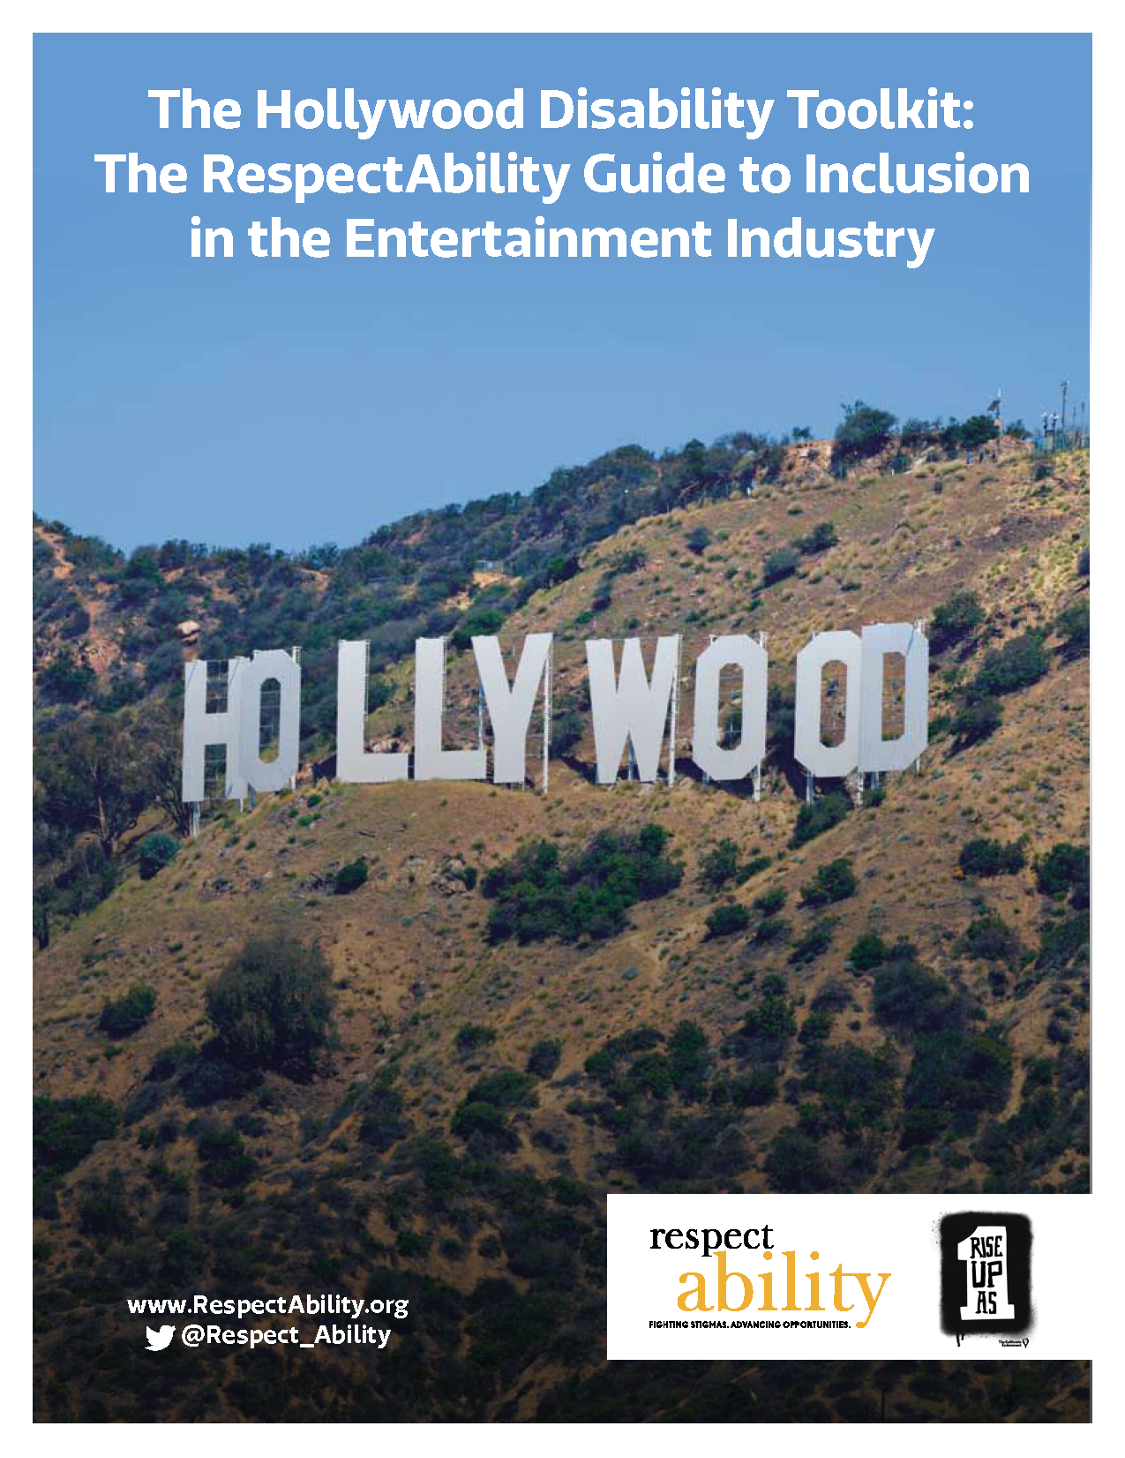 The Hollywood Disability Toolkit: The RespectAbility Guide to Inclusion in the Entertainment Industry